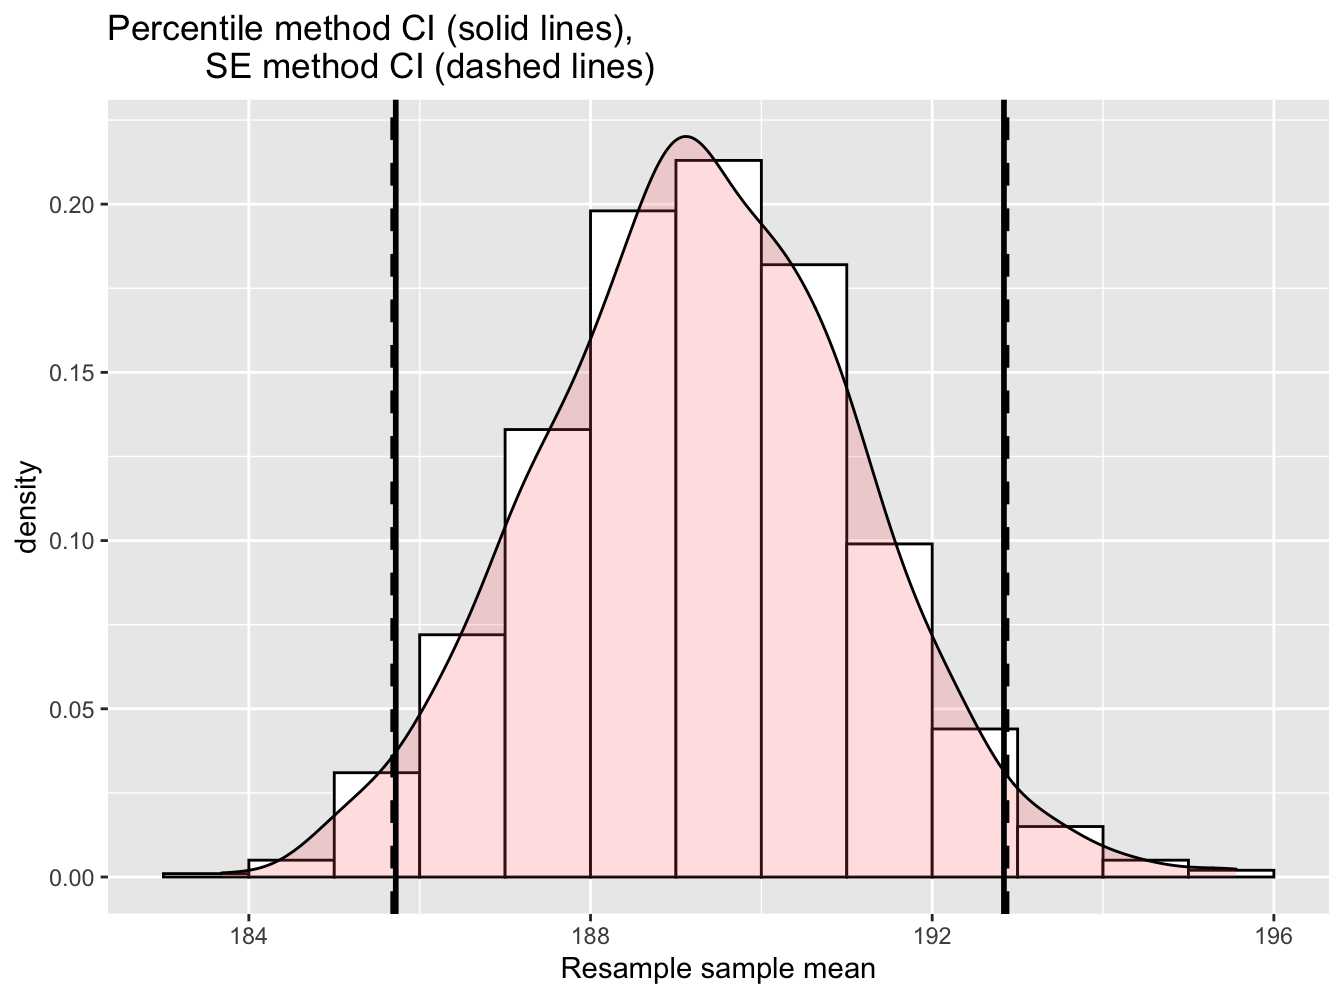 Comparing two 95% confidence interval methods.